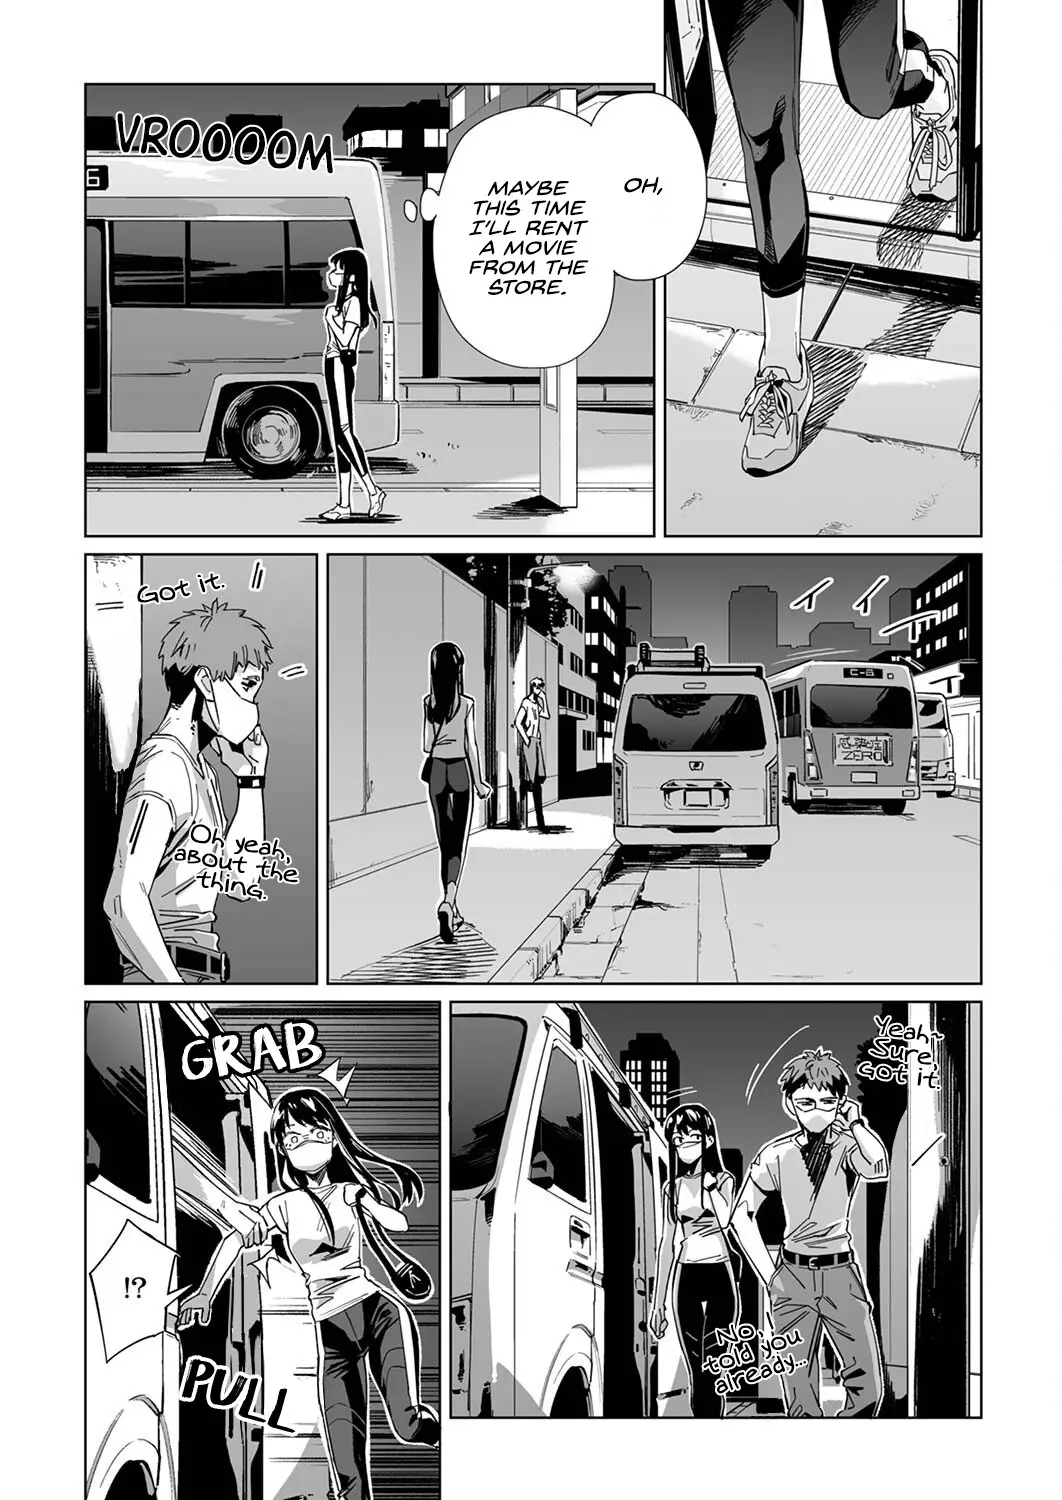 New Normal - 20 page 23-2945f7c2